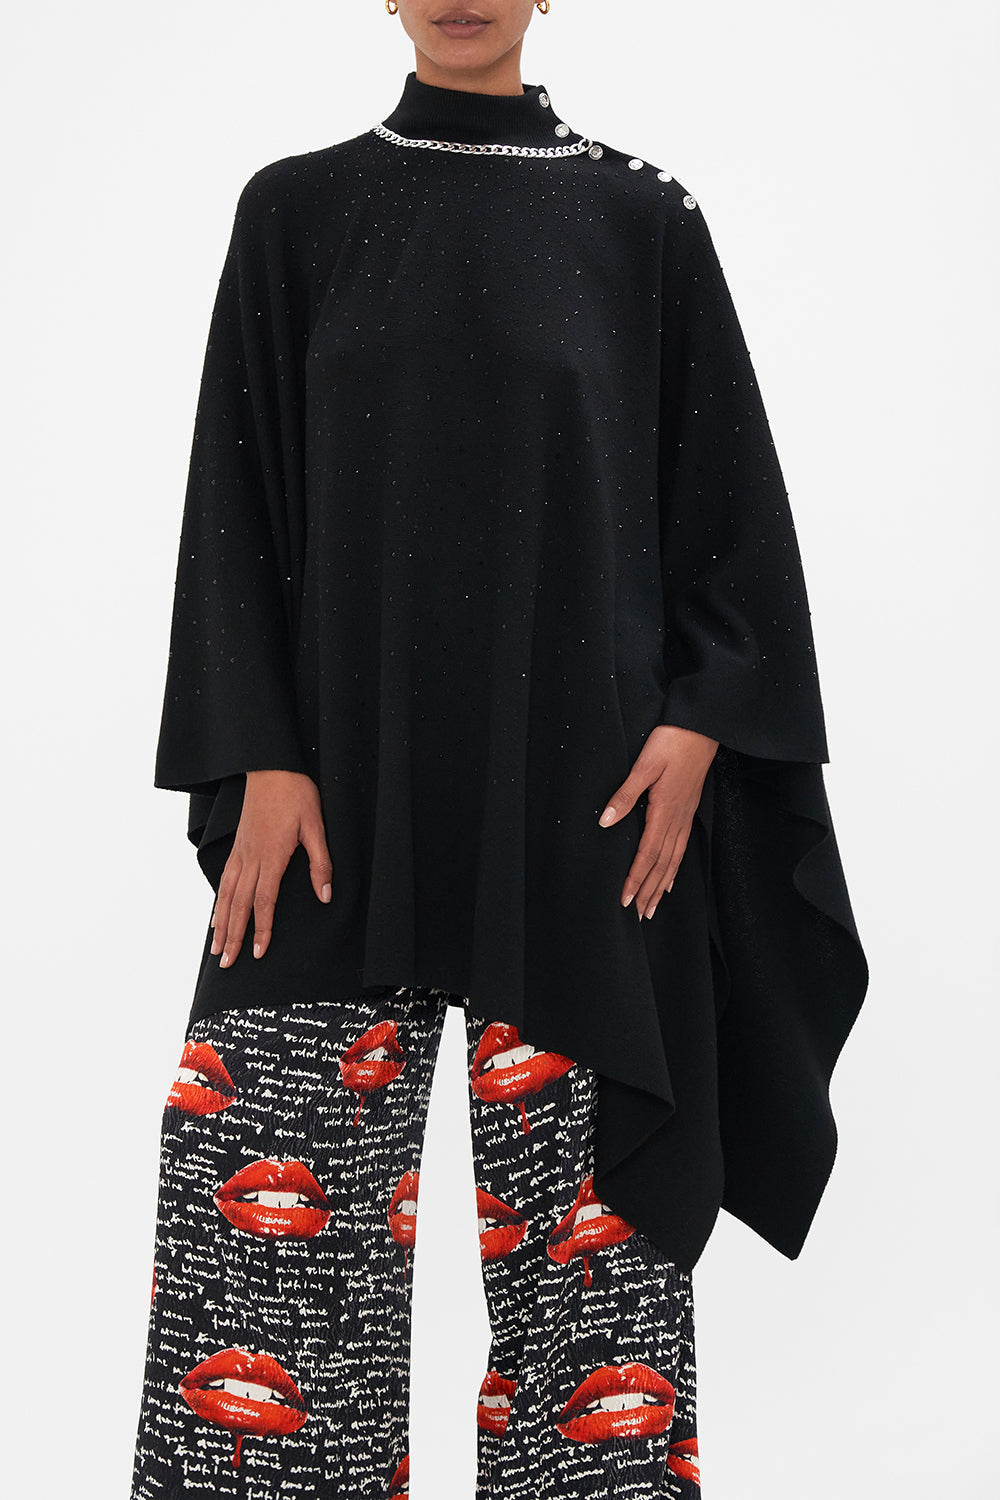 Crop view of model wearing CAMILLA black knit poncho in Chaos Magic 